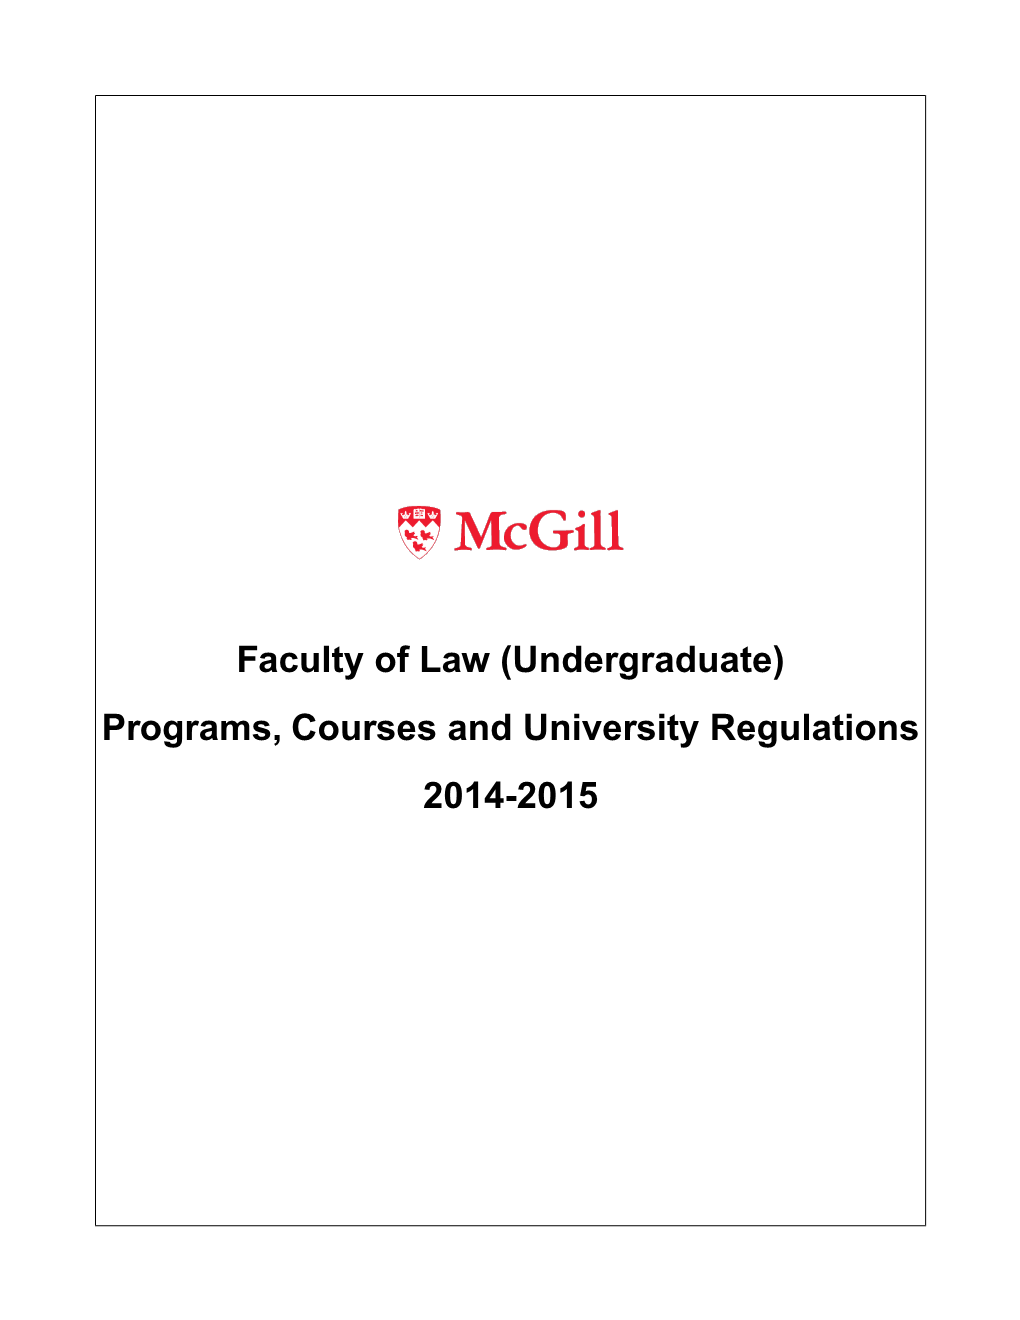 Faculty of Law (Undergraduate) Programs, Courses and University Regulations 2014-2015